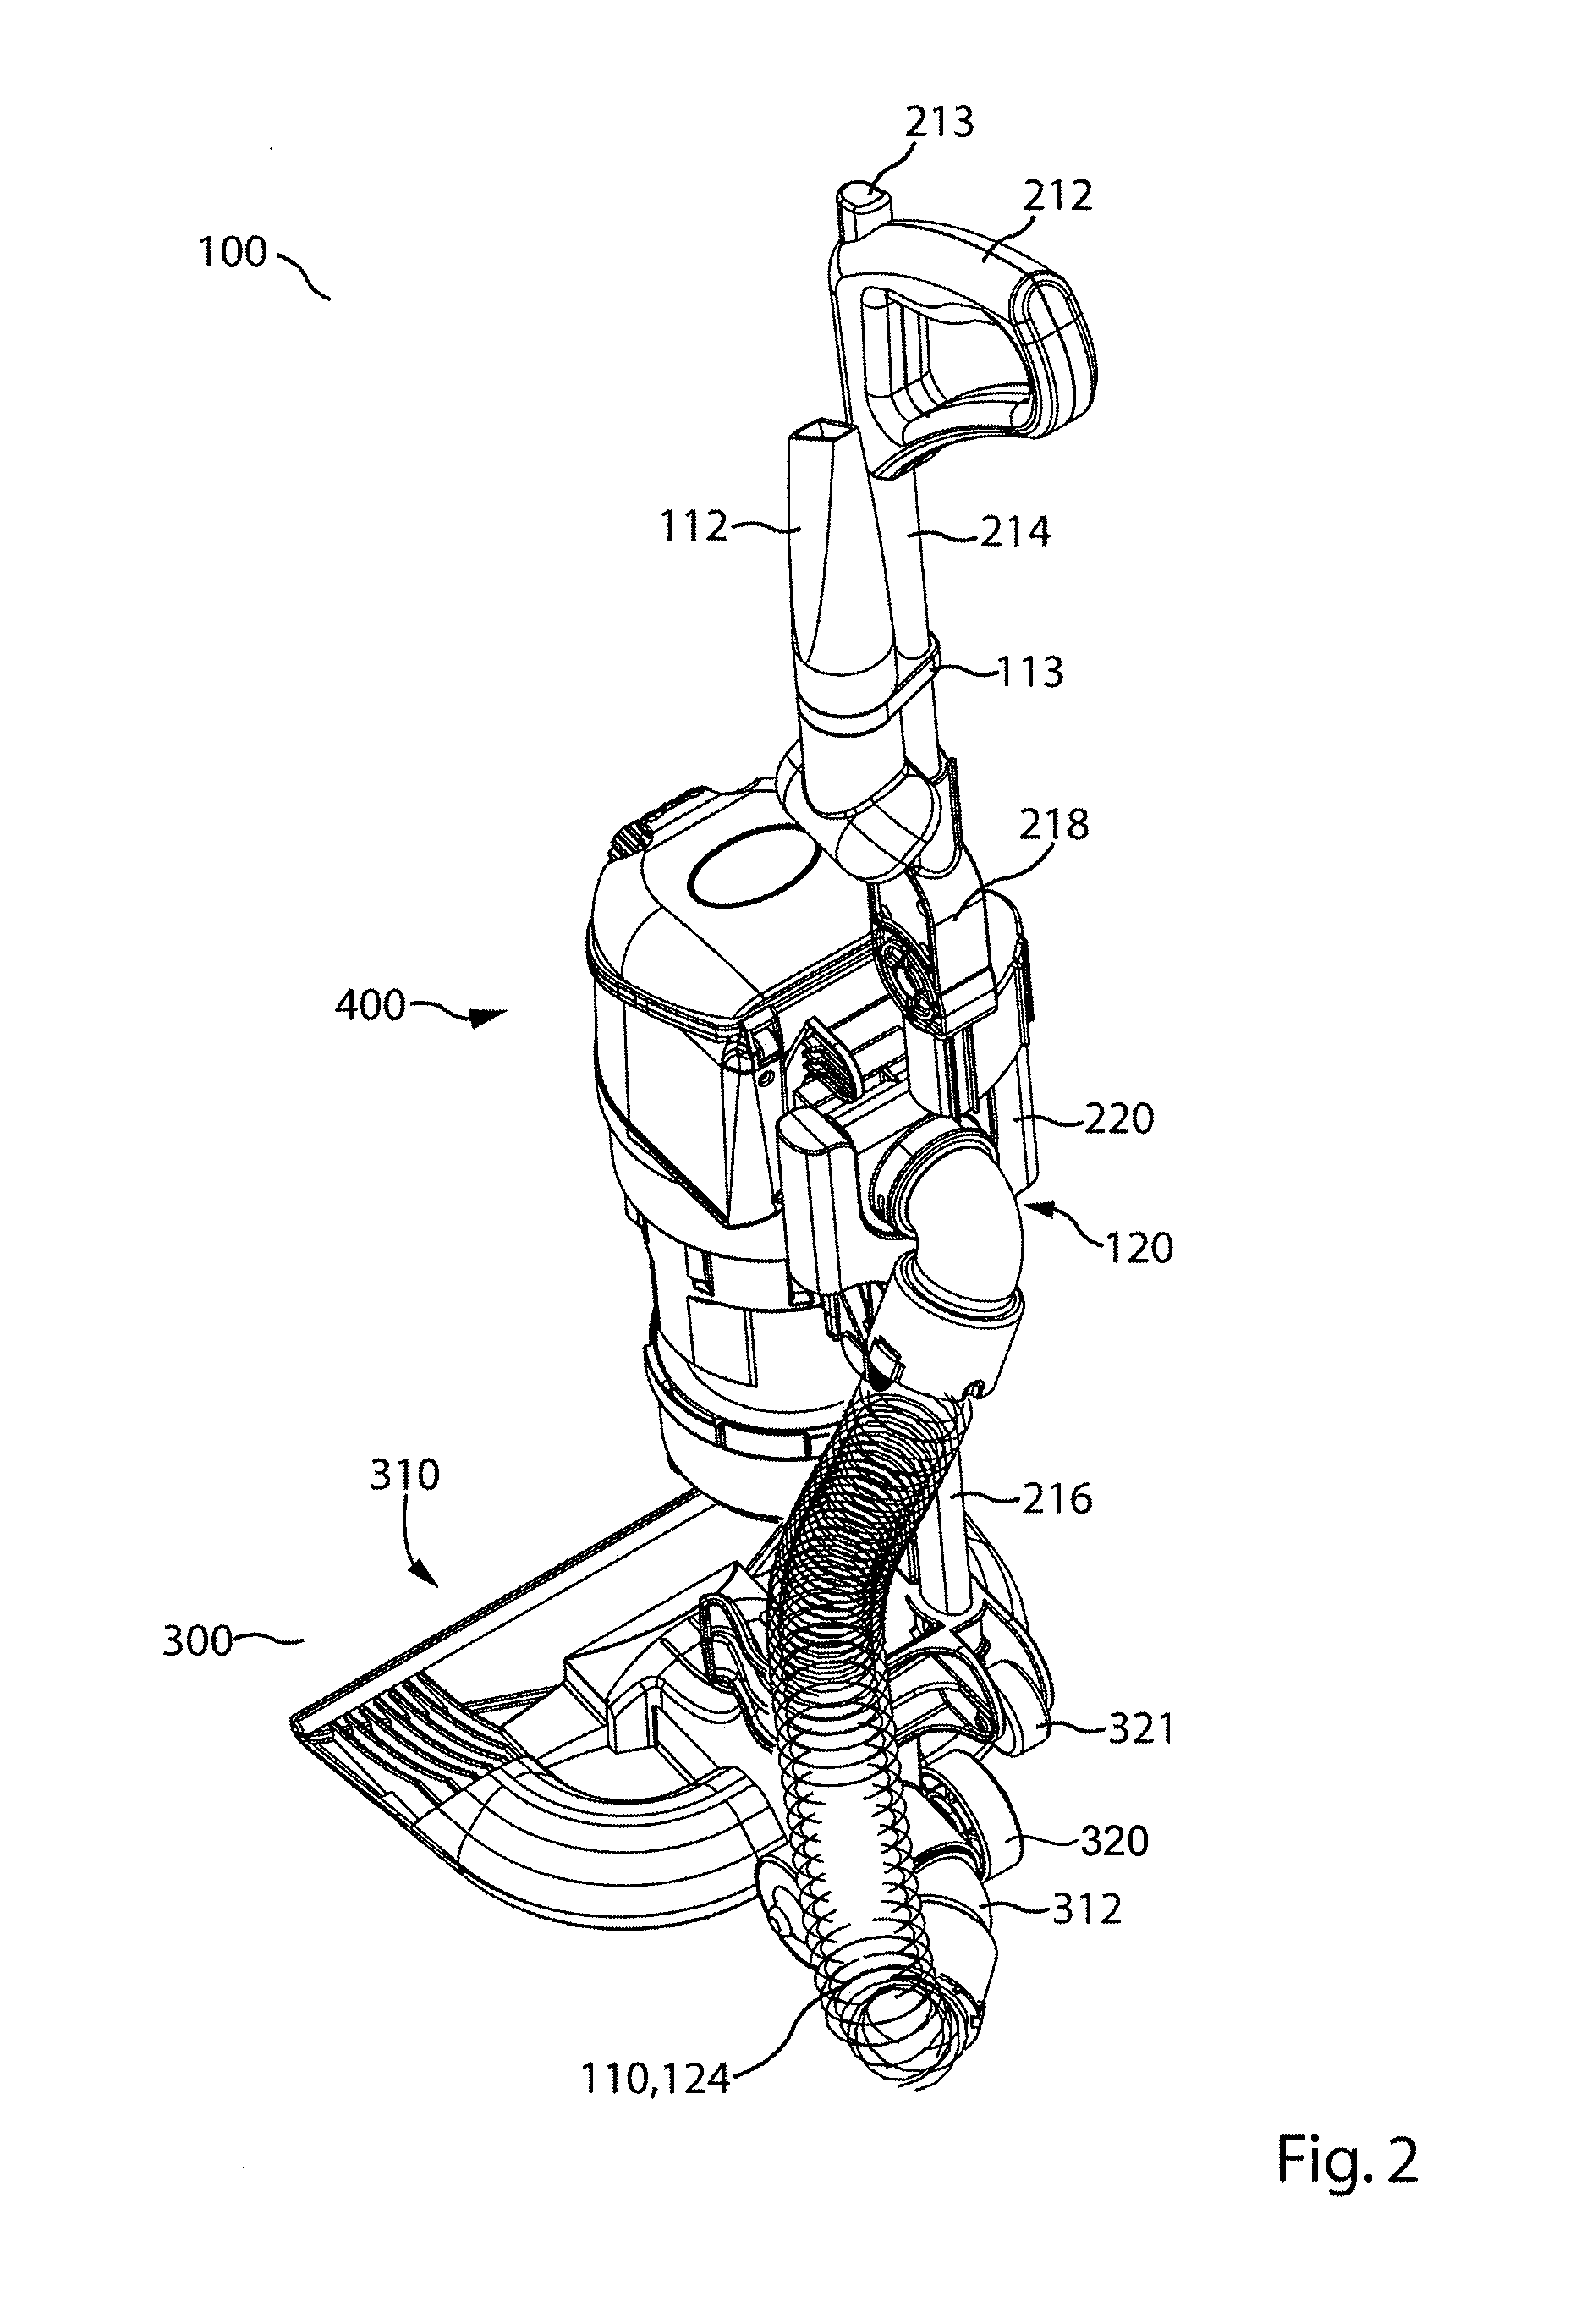 Surface cleaning apparatus